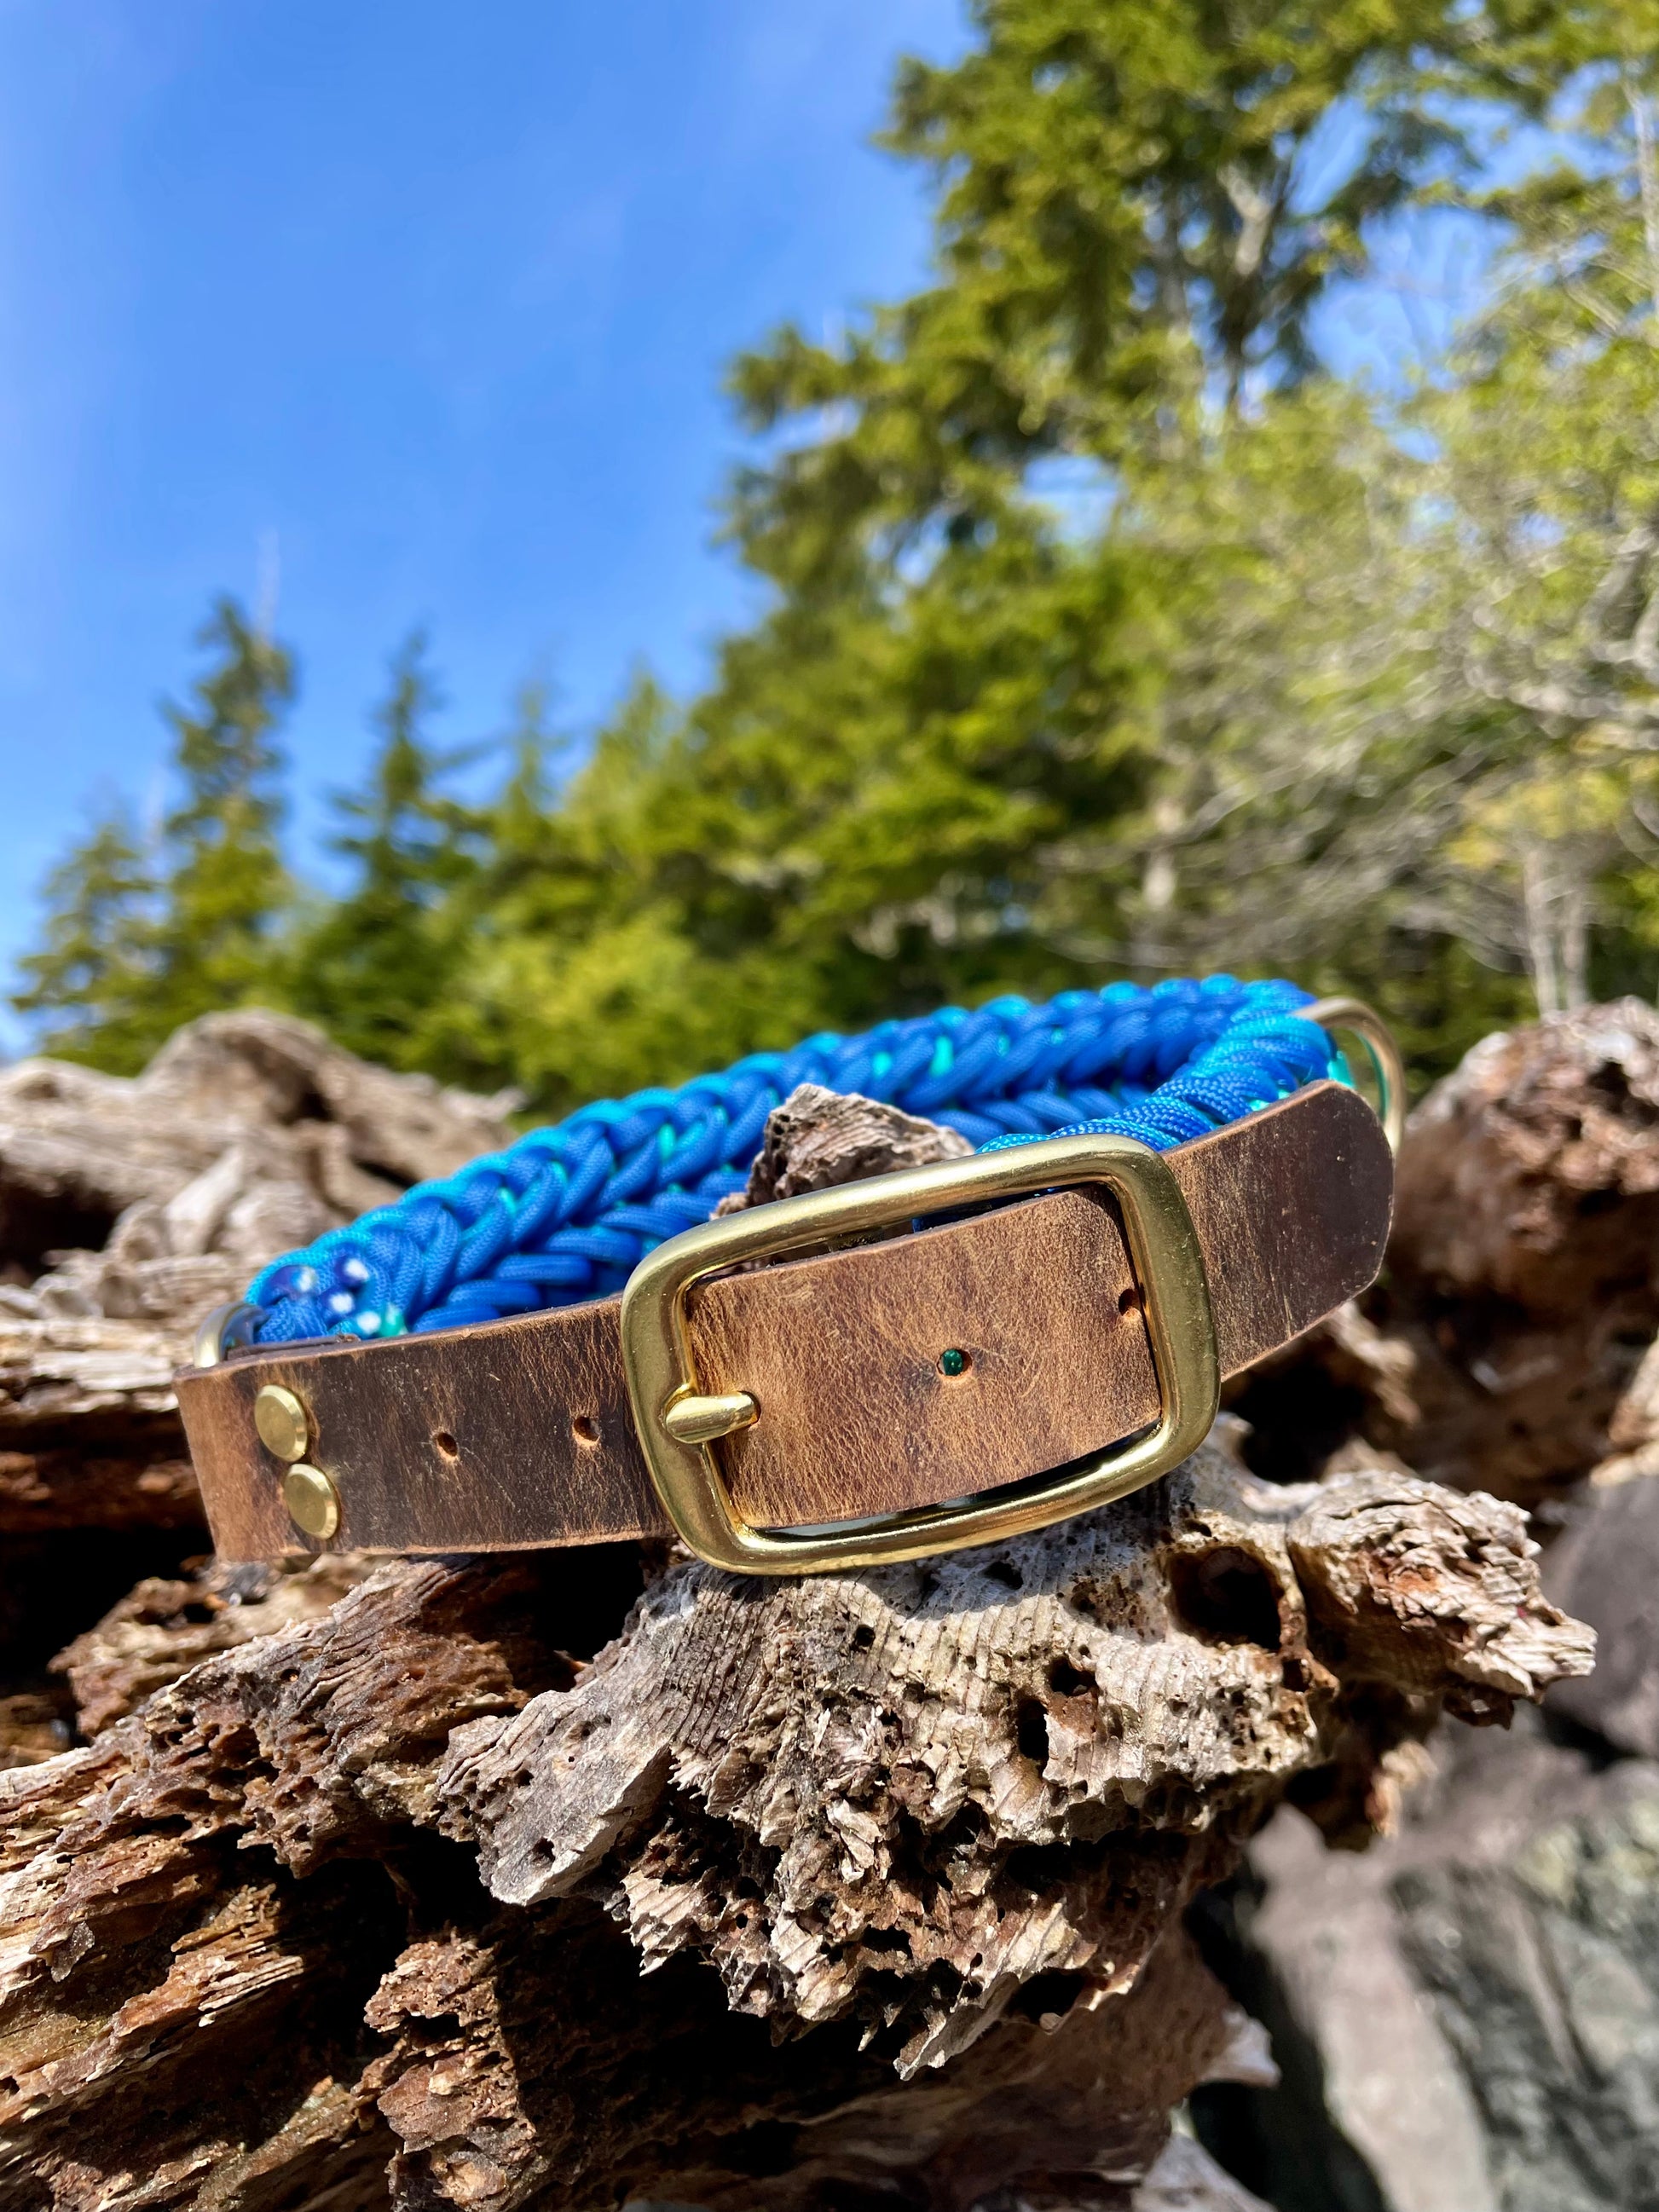 Premium Teal and Blue Paracord Dog Collar with Gold hardware and leather or Biothane belt On Driftwood In Tofino